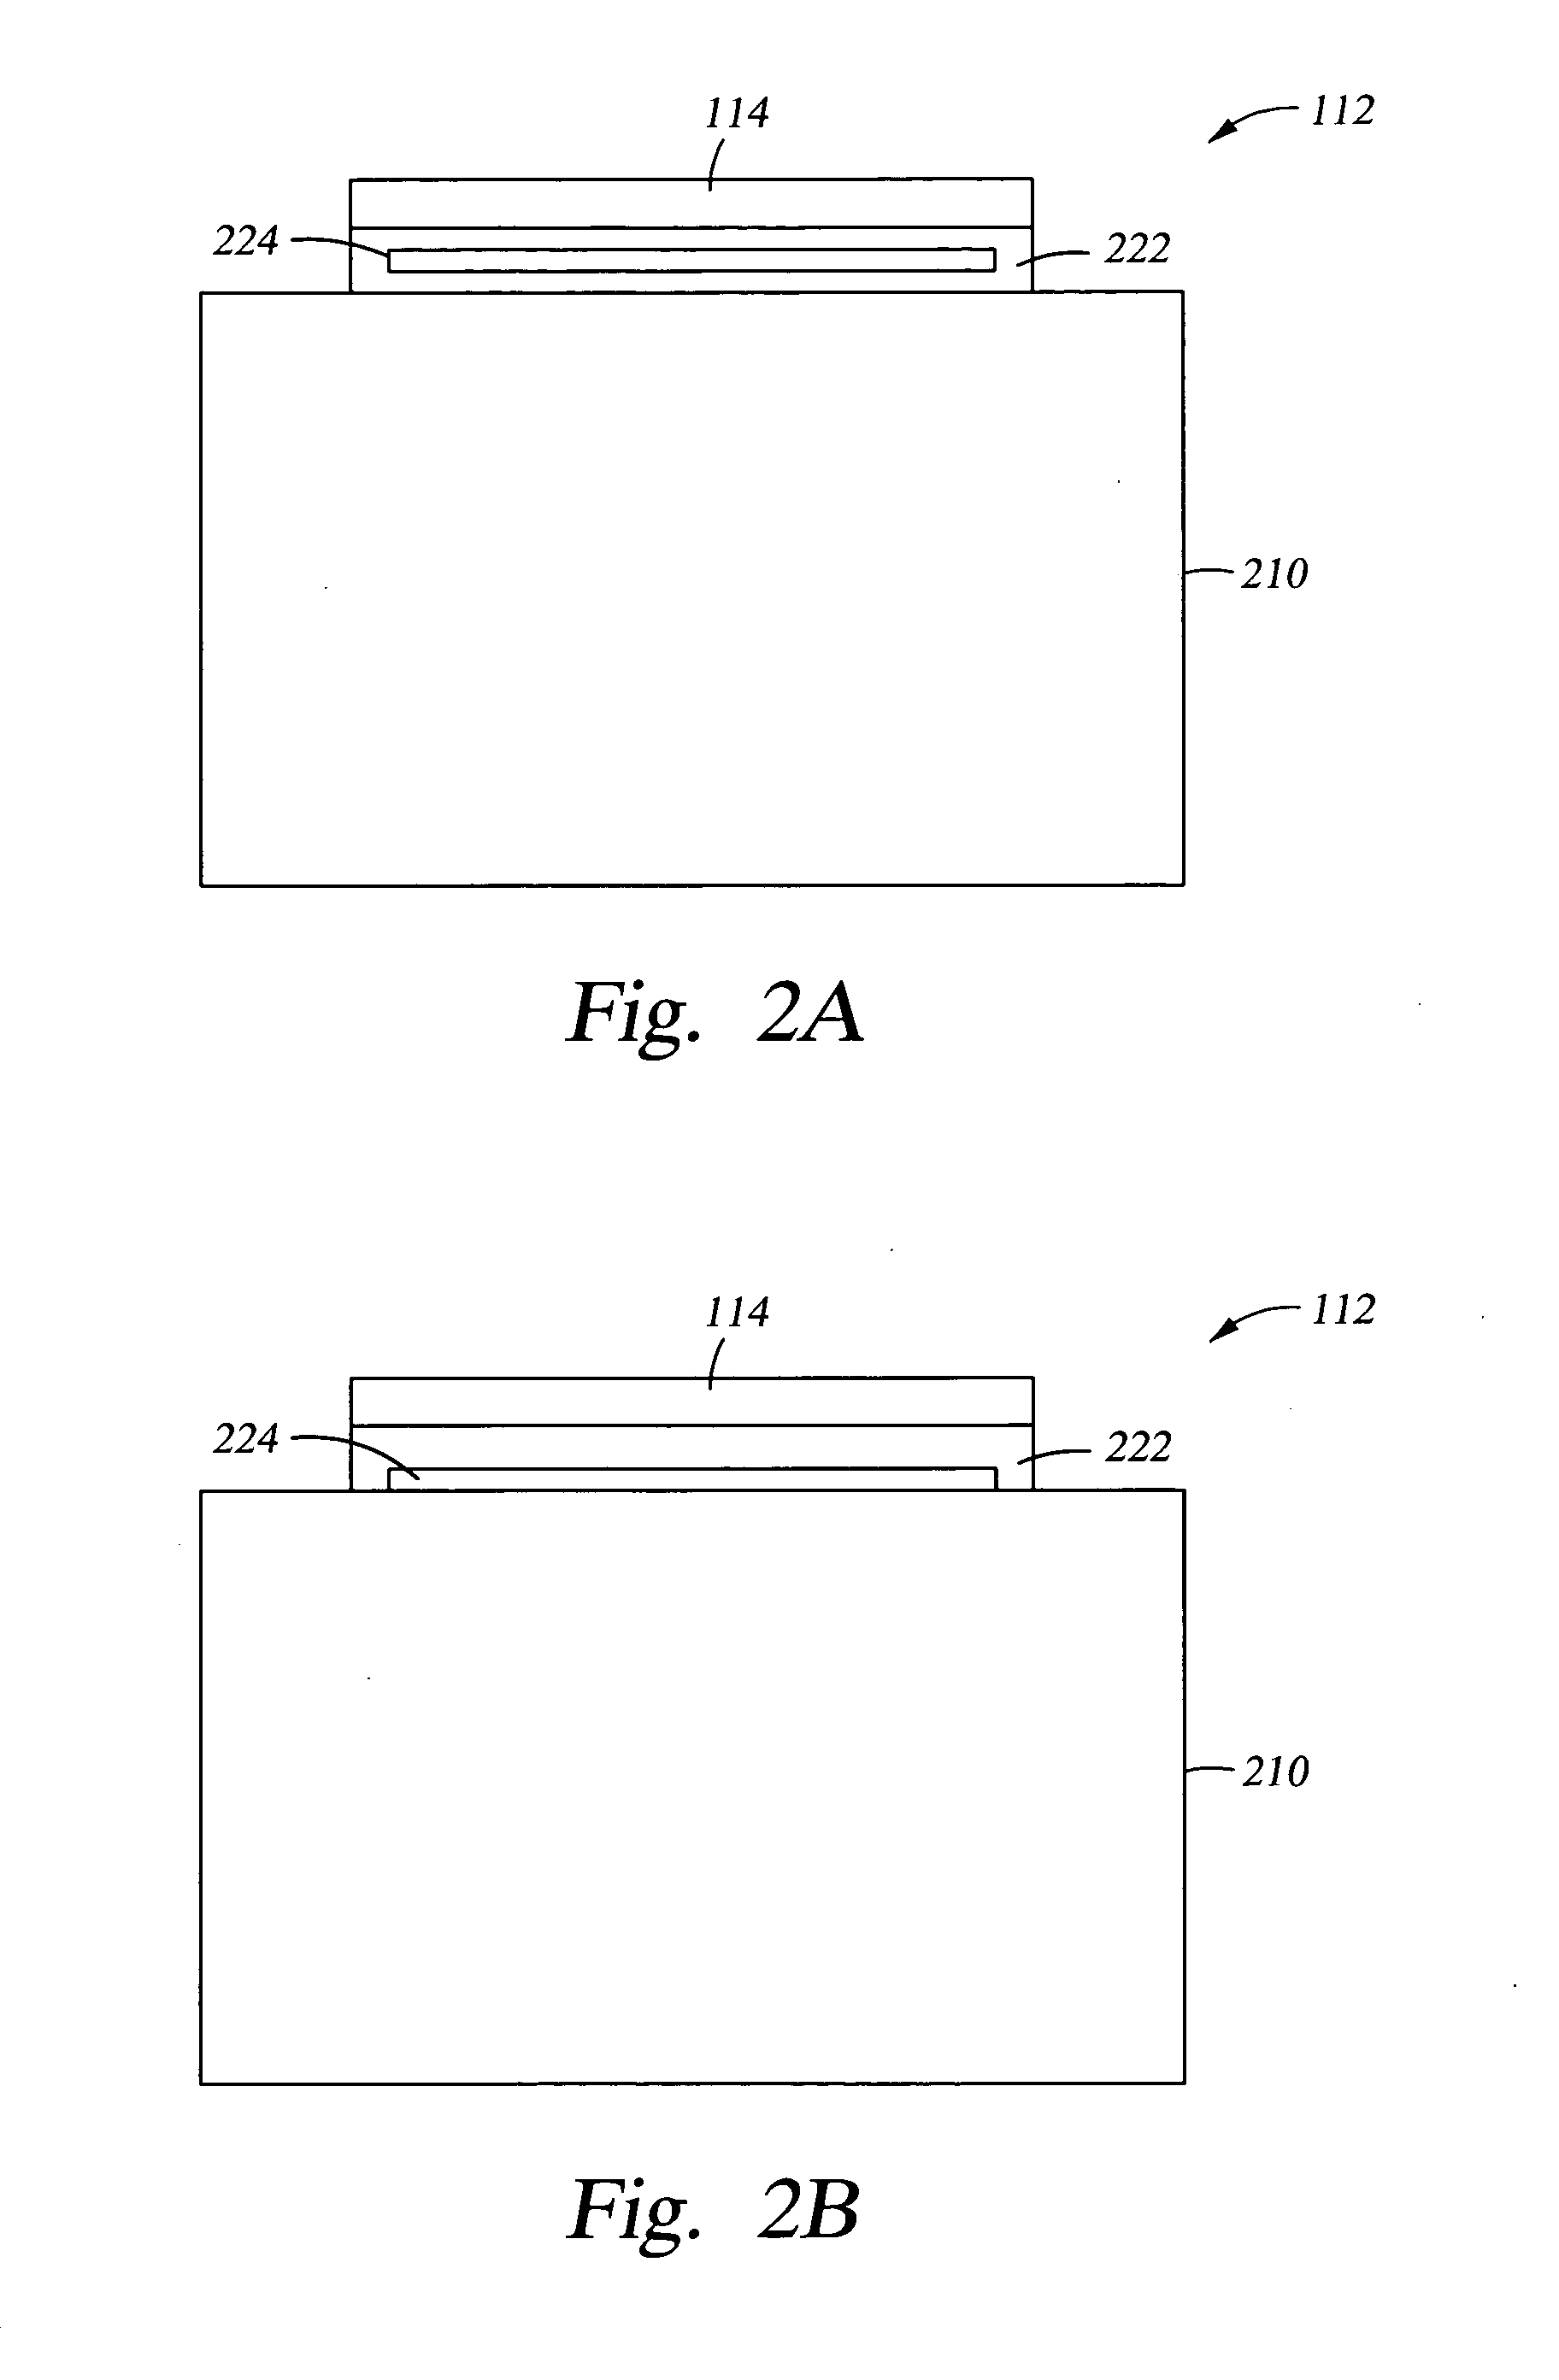 Substrate holder which is self-adjusting for substrate deformation